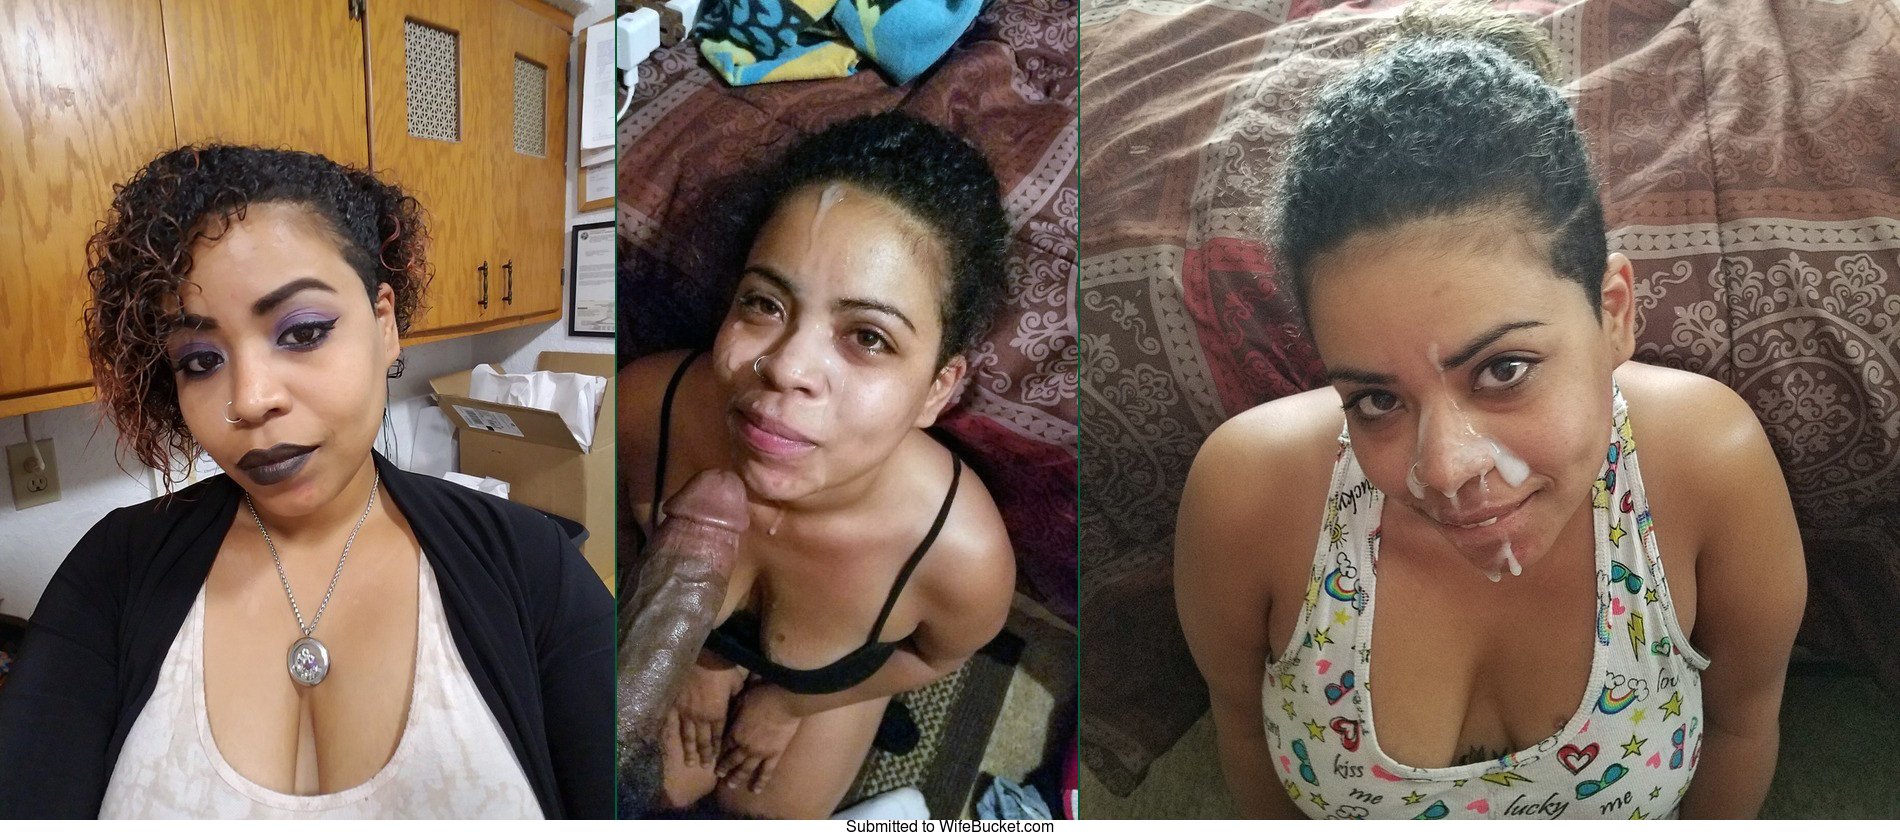 Before And After Bukkake - before-after pics â€“ WifeBucket | Offical MILF Blog